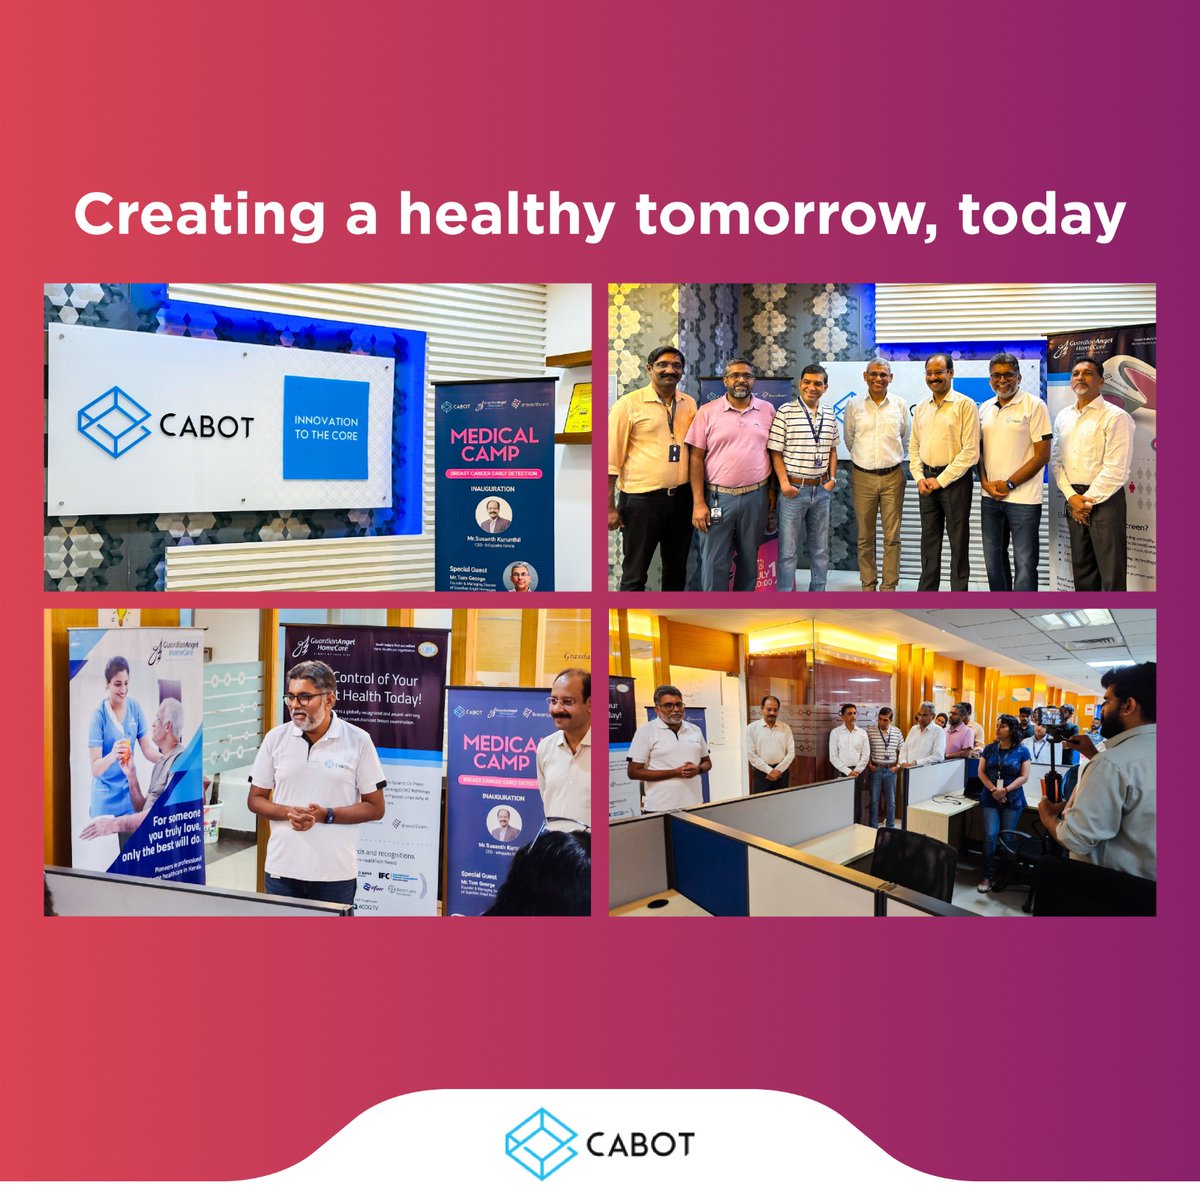 Infopark CEO, Shri Susanth Kurunthil inaugurated a #medicalcamp hosted by #CabotSolutions in association with Guardian Angel Homecare. This camp held at Cabot's office in Infopark Kochi took a significant step towards raising #awareness.

#KeralaIT #ITParks #KeralaITParks